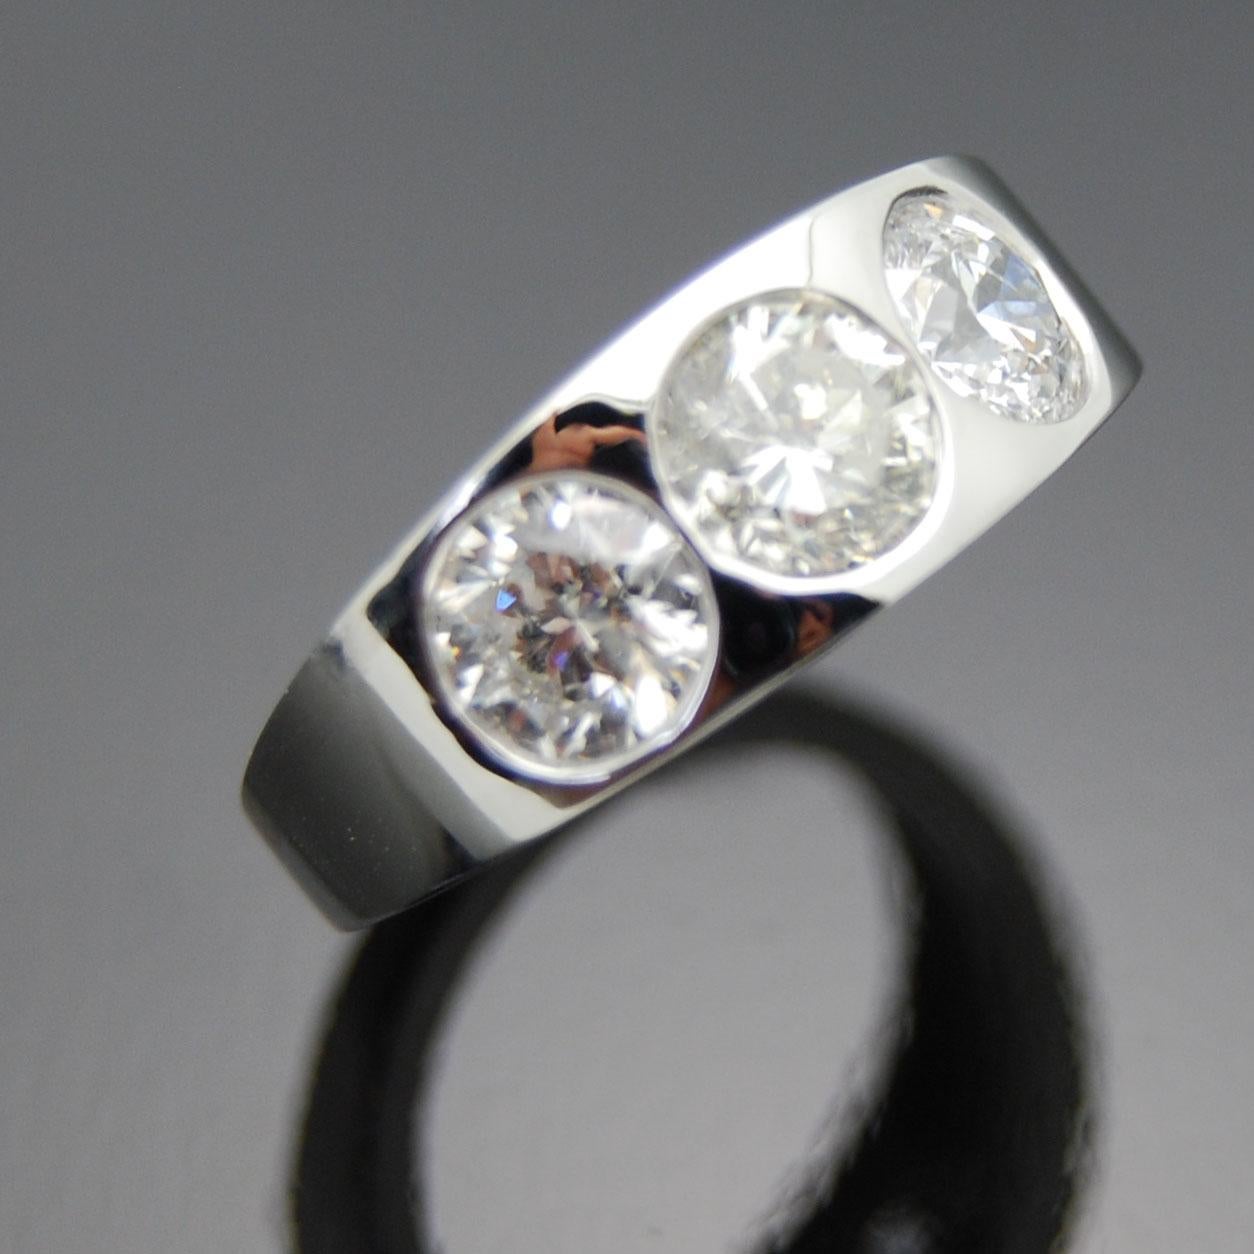 14kt White Gold Diamonds Ring. This low profile ring features a trio of round brilliant cut diamonds in a delicately tapered white gold band.

This item is a custom order only. Price is for the ring setting only. The stone will be priced separately.